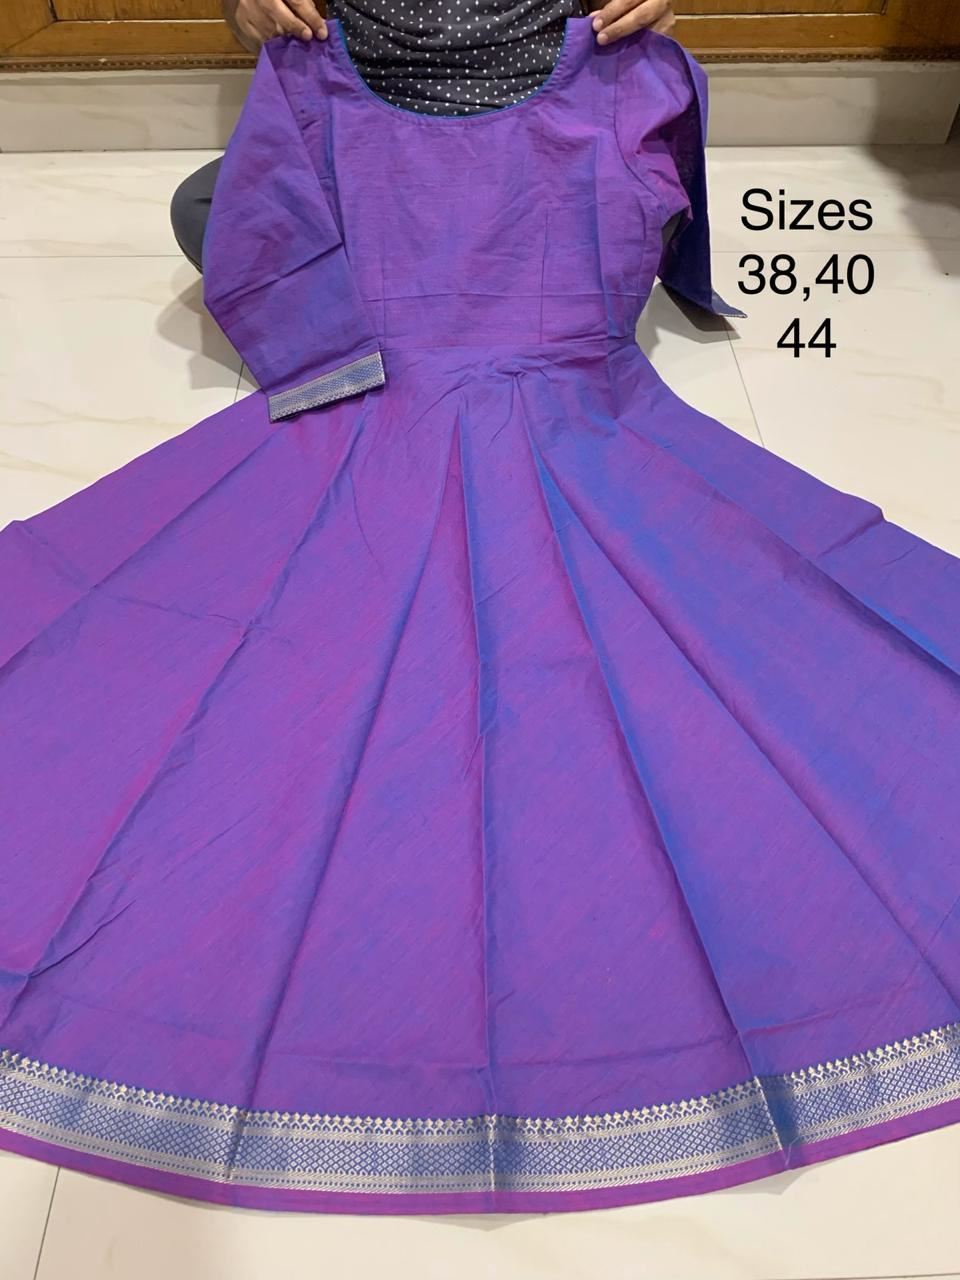 30 Stylish Designs of Cotton Frocks for Women and Girl